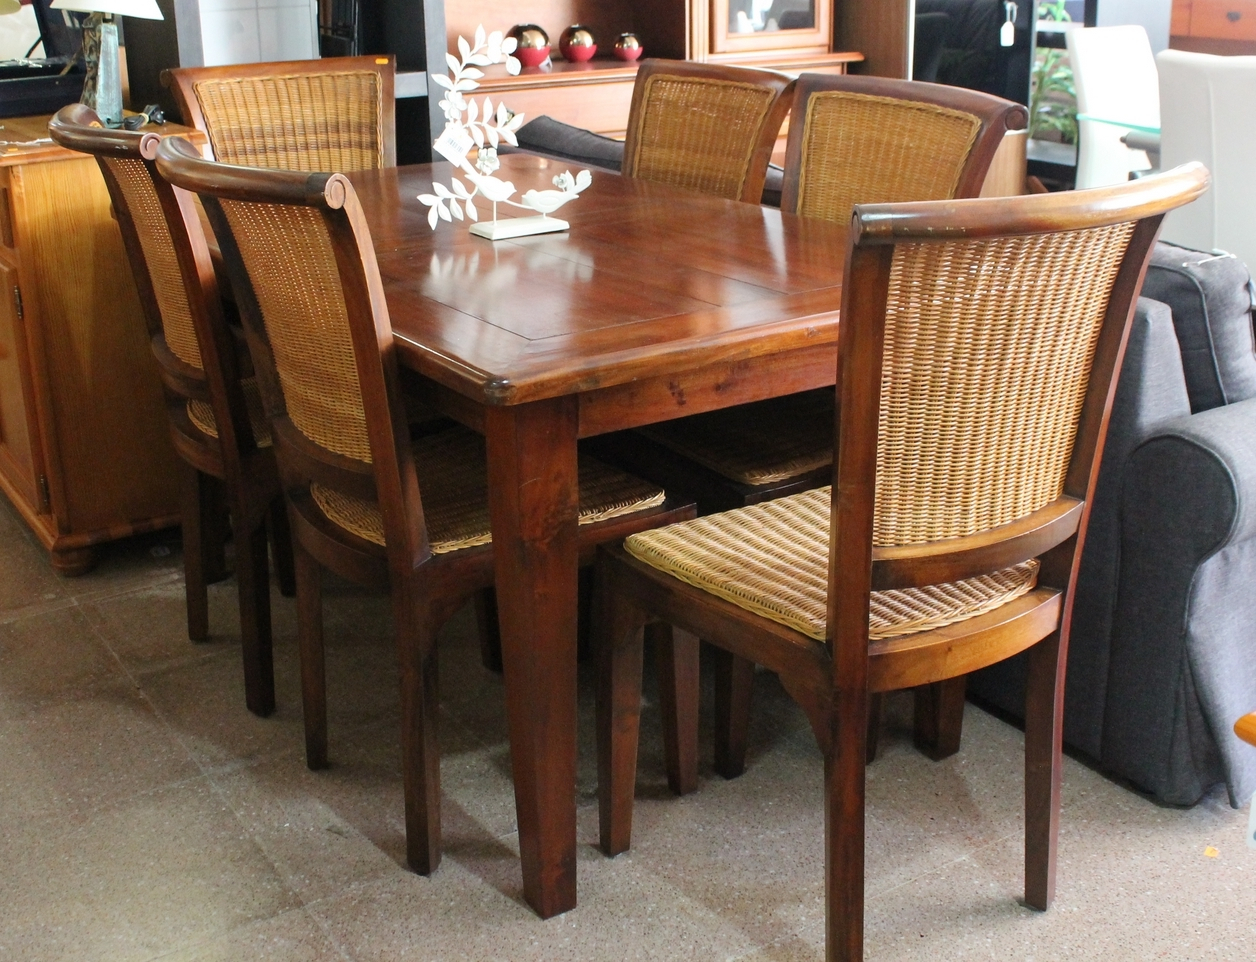 Second Hand Dining Room Sets For Sale